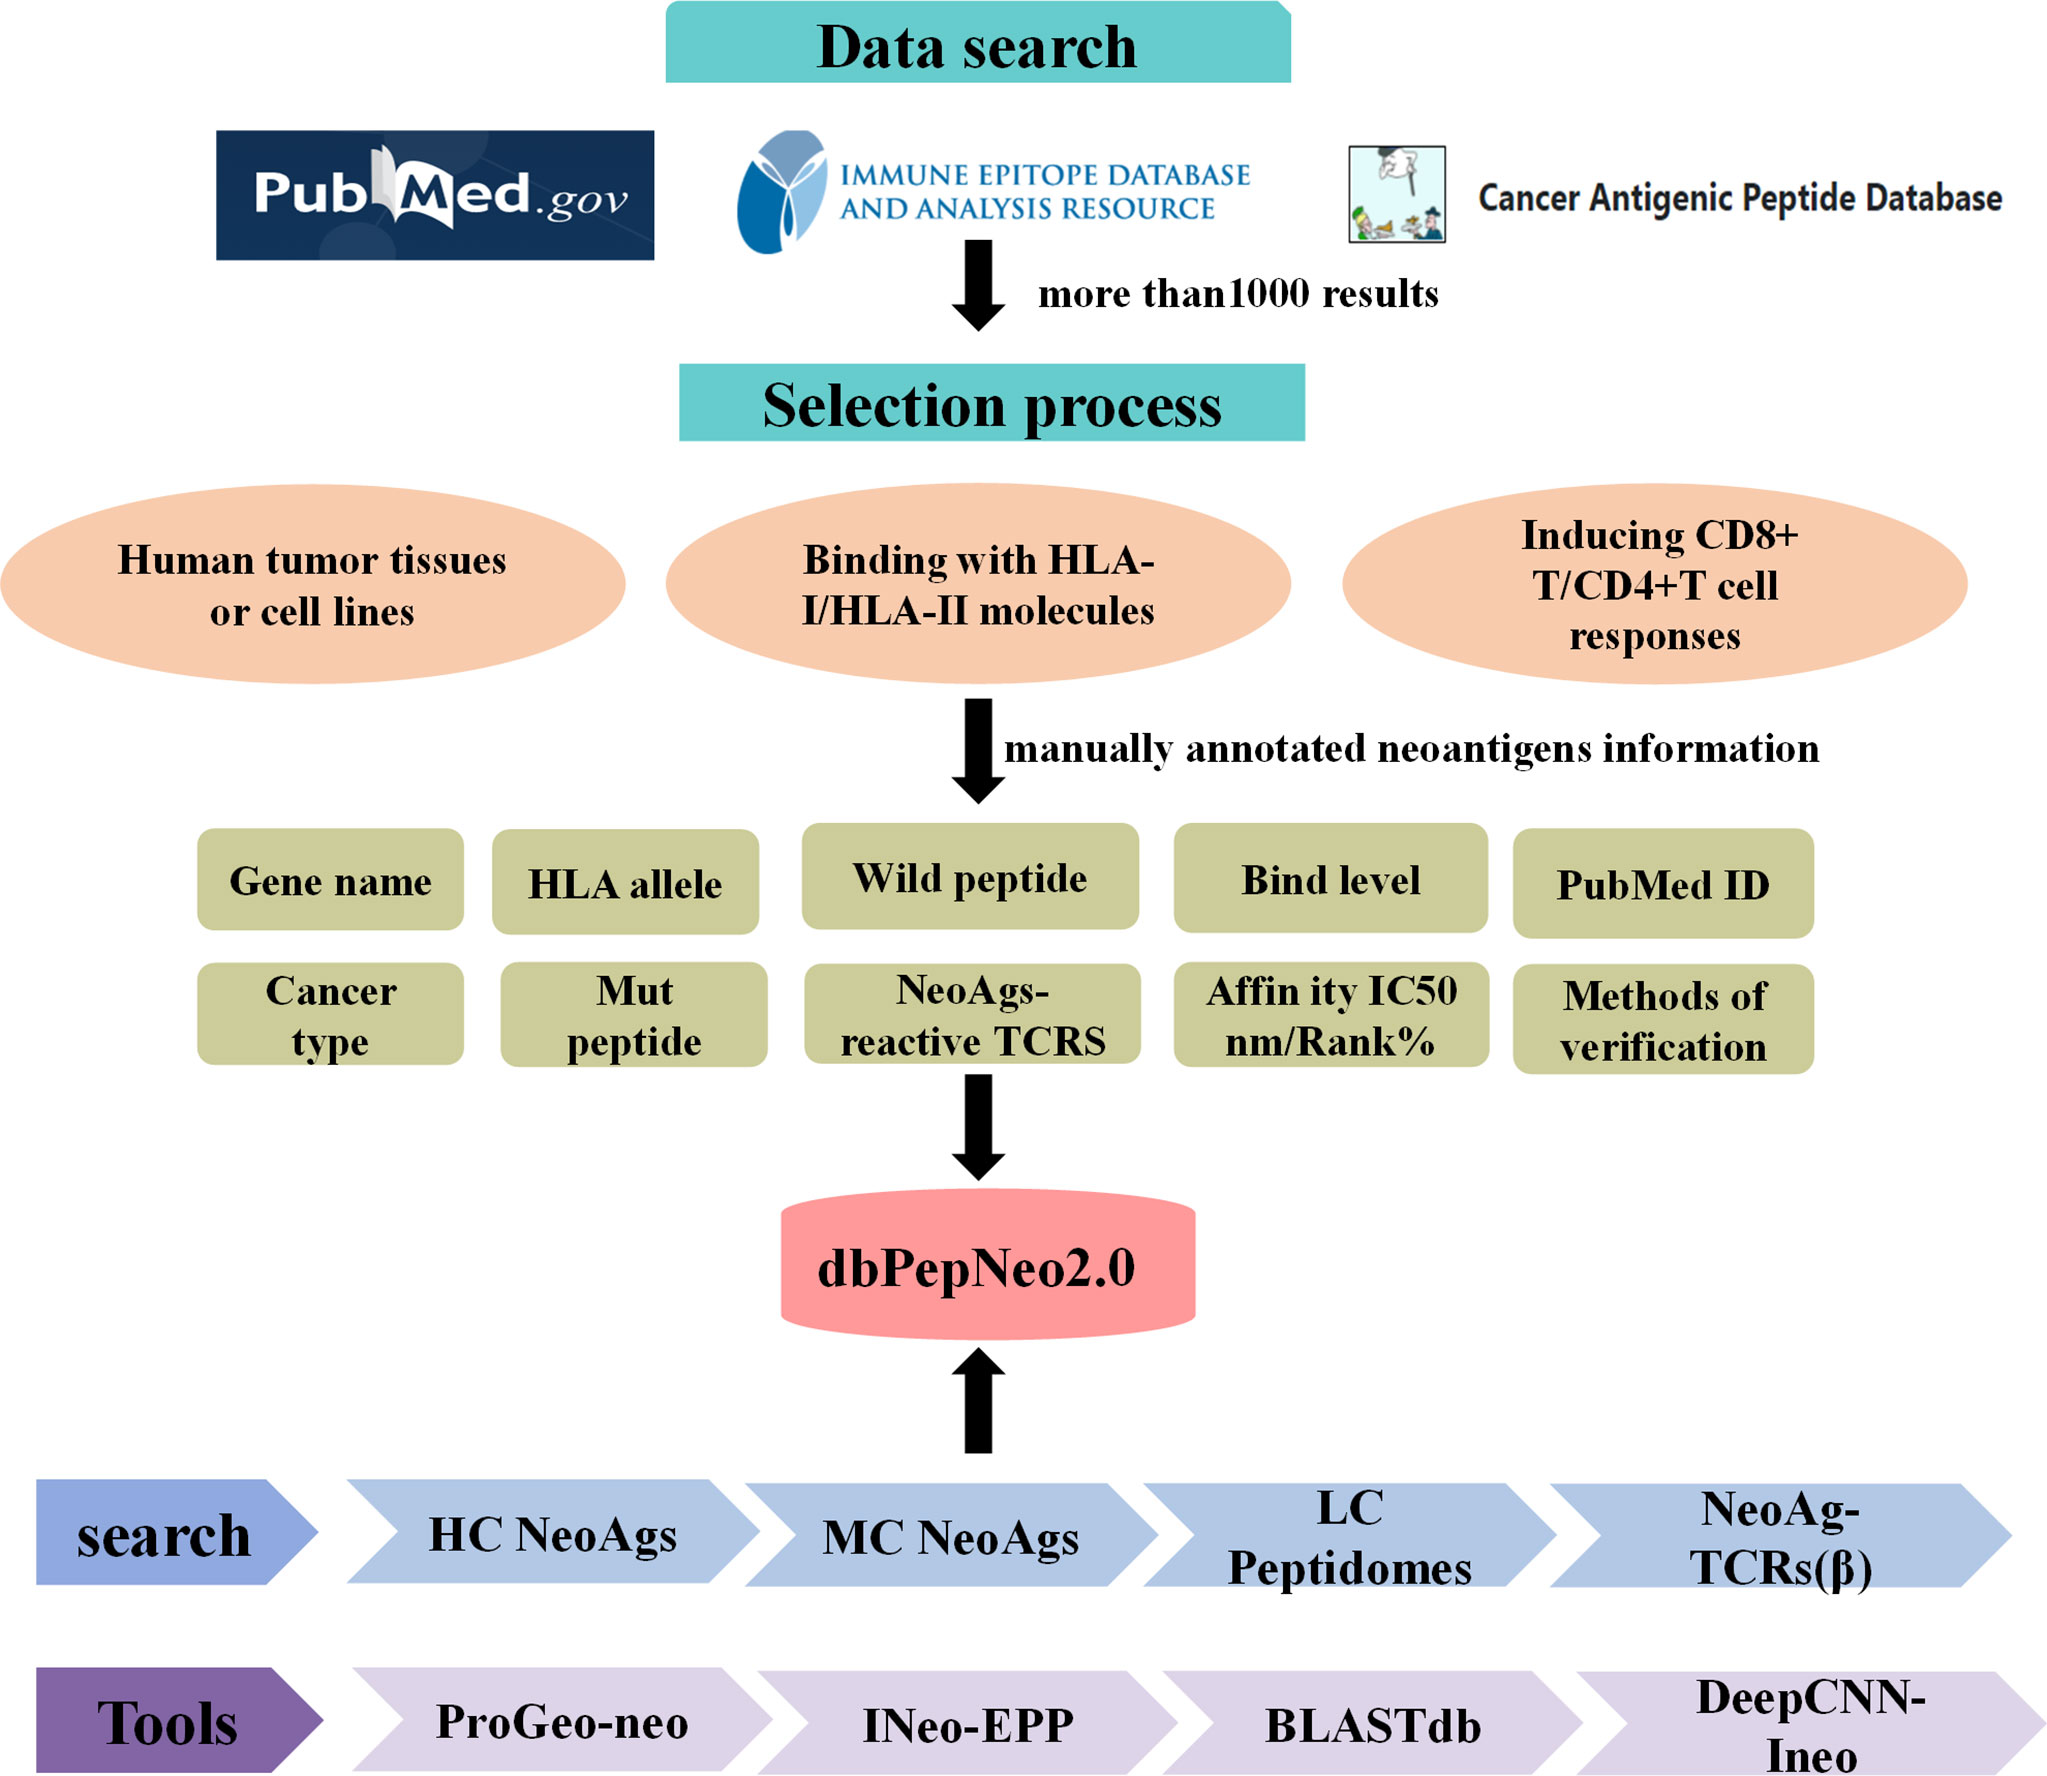 Frontiers  dbPepNeo2.0: A Database for Human Tumor Neoantigen Peptides  From Mass Spectrometry and TCR Recognition